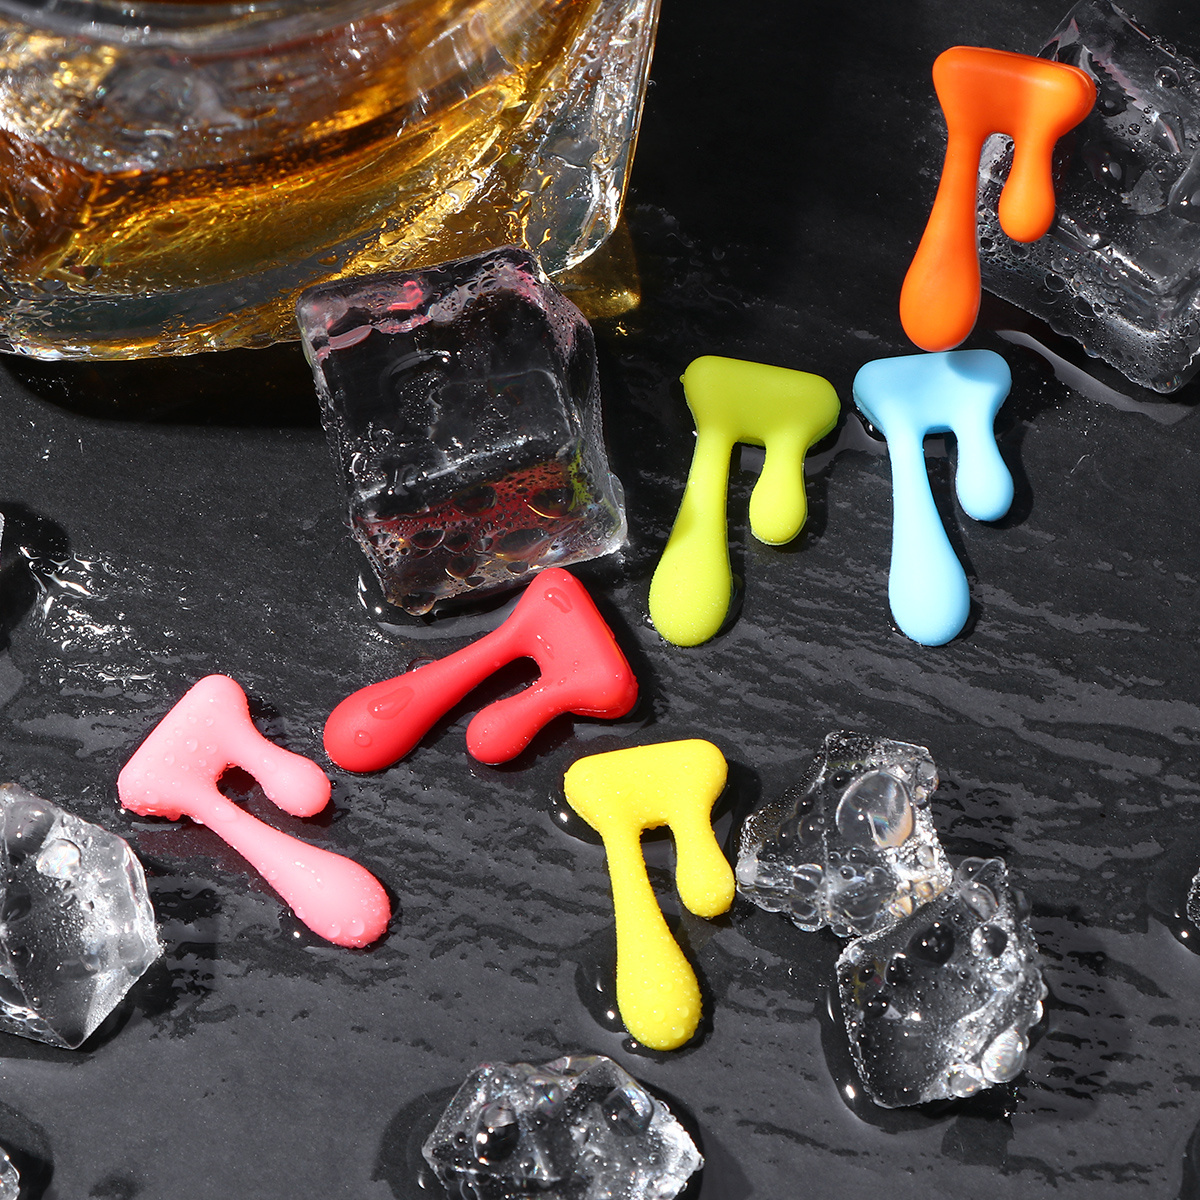 Ktyne 8PCS Mini Circle Silicone Wine Glass Marker Cup Identification Ring  For Party